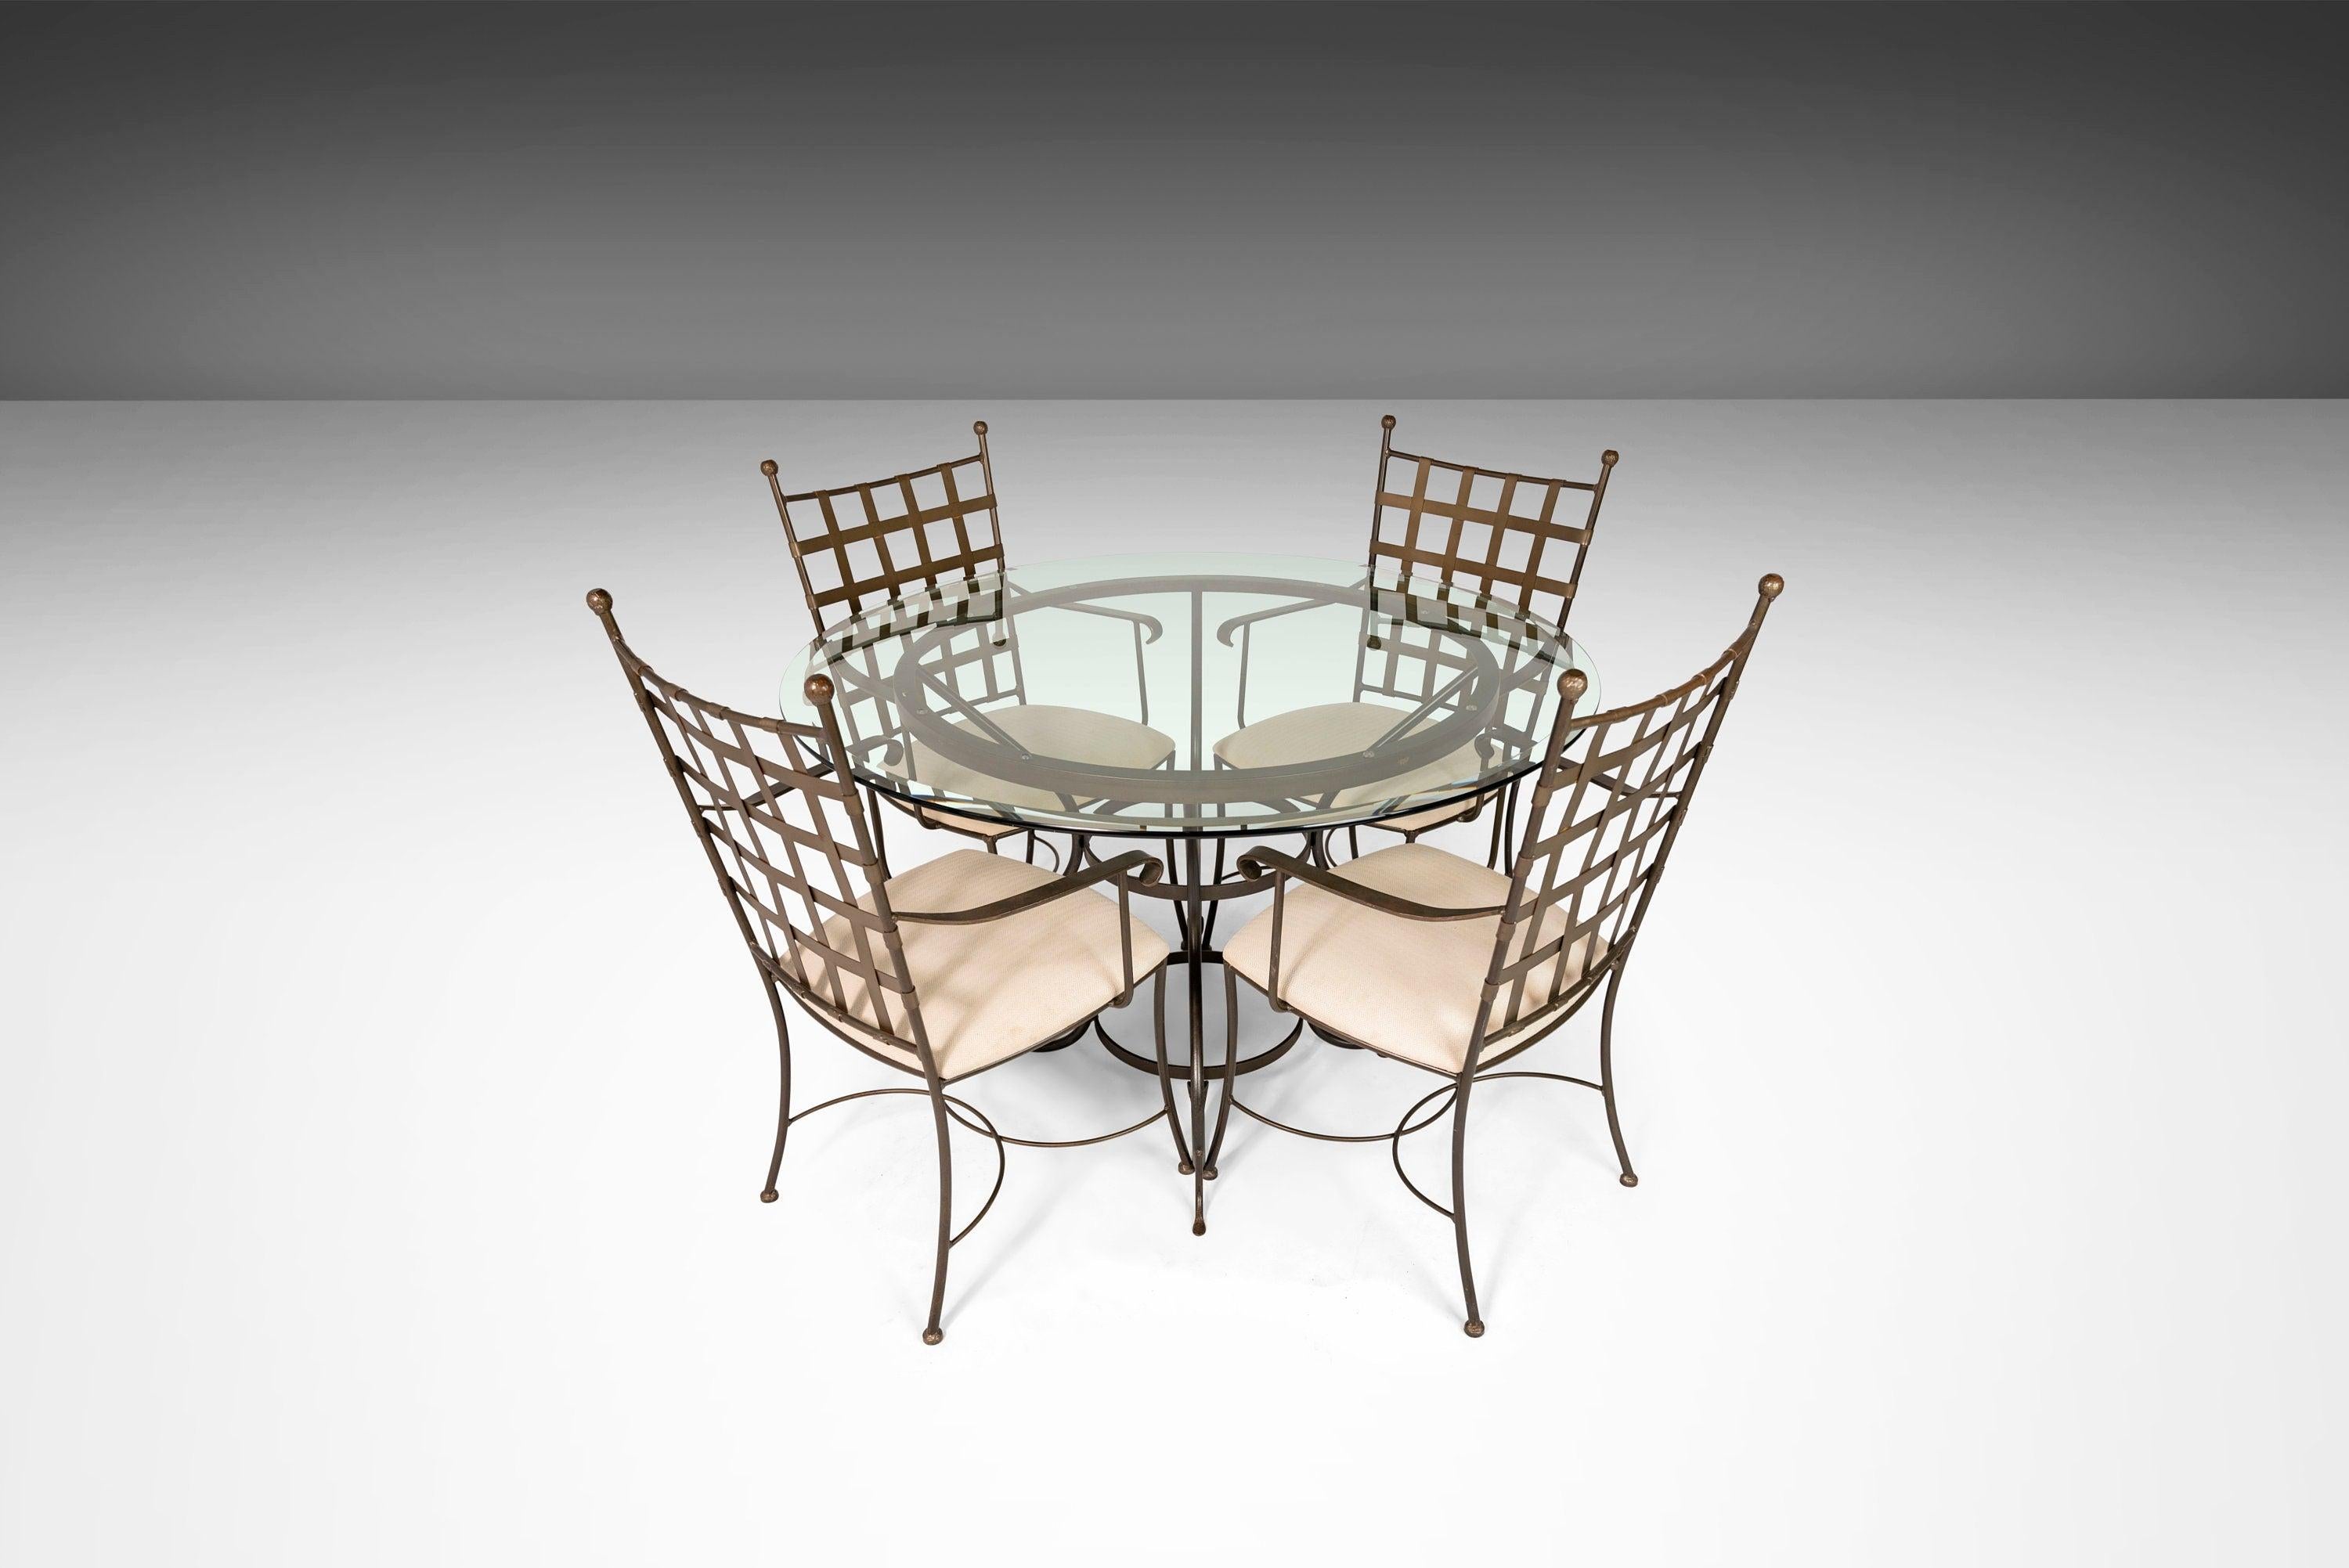 Forged by hand in Boone, North Carolina this exceptional dining table is a true representation of both American design and craftsmanship. Each piece produced by Charleston Forge is custom-made and all done by hand by specialized artisans and it